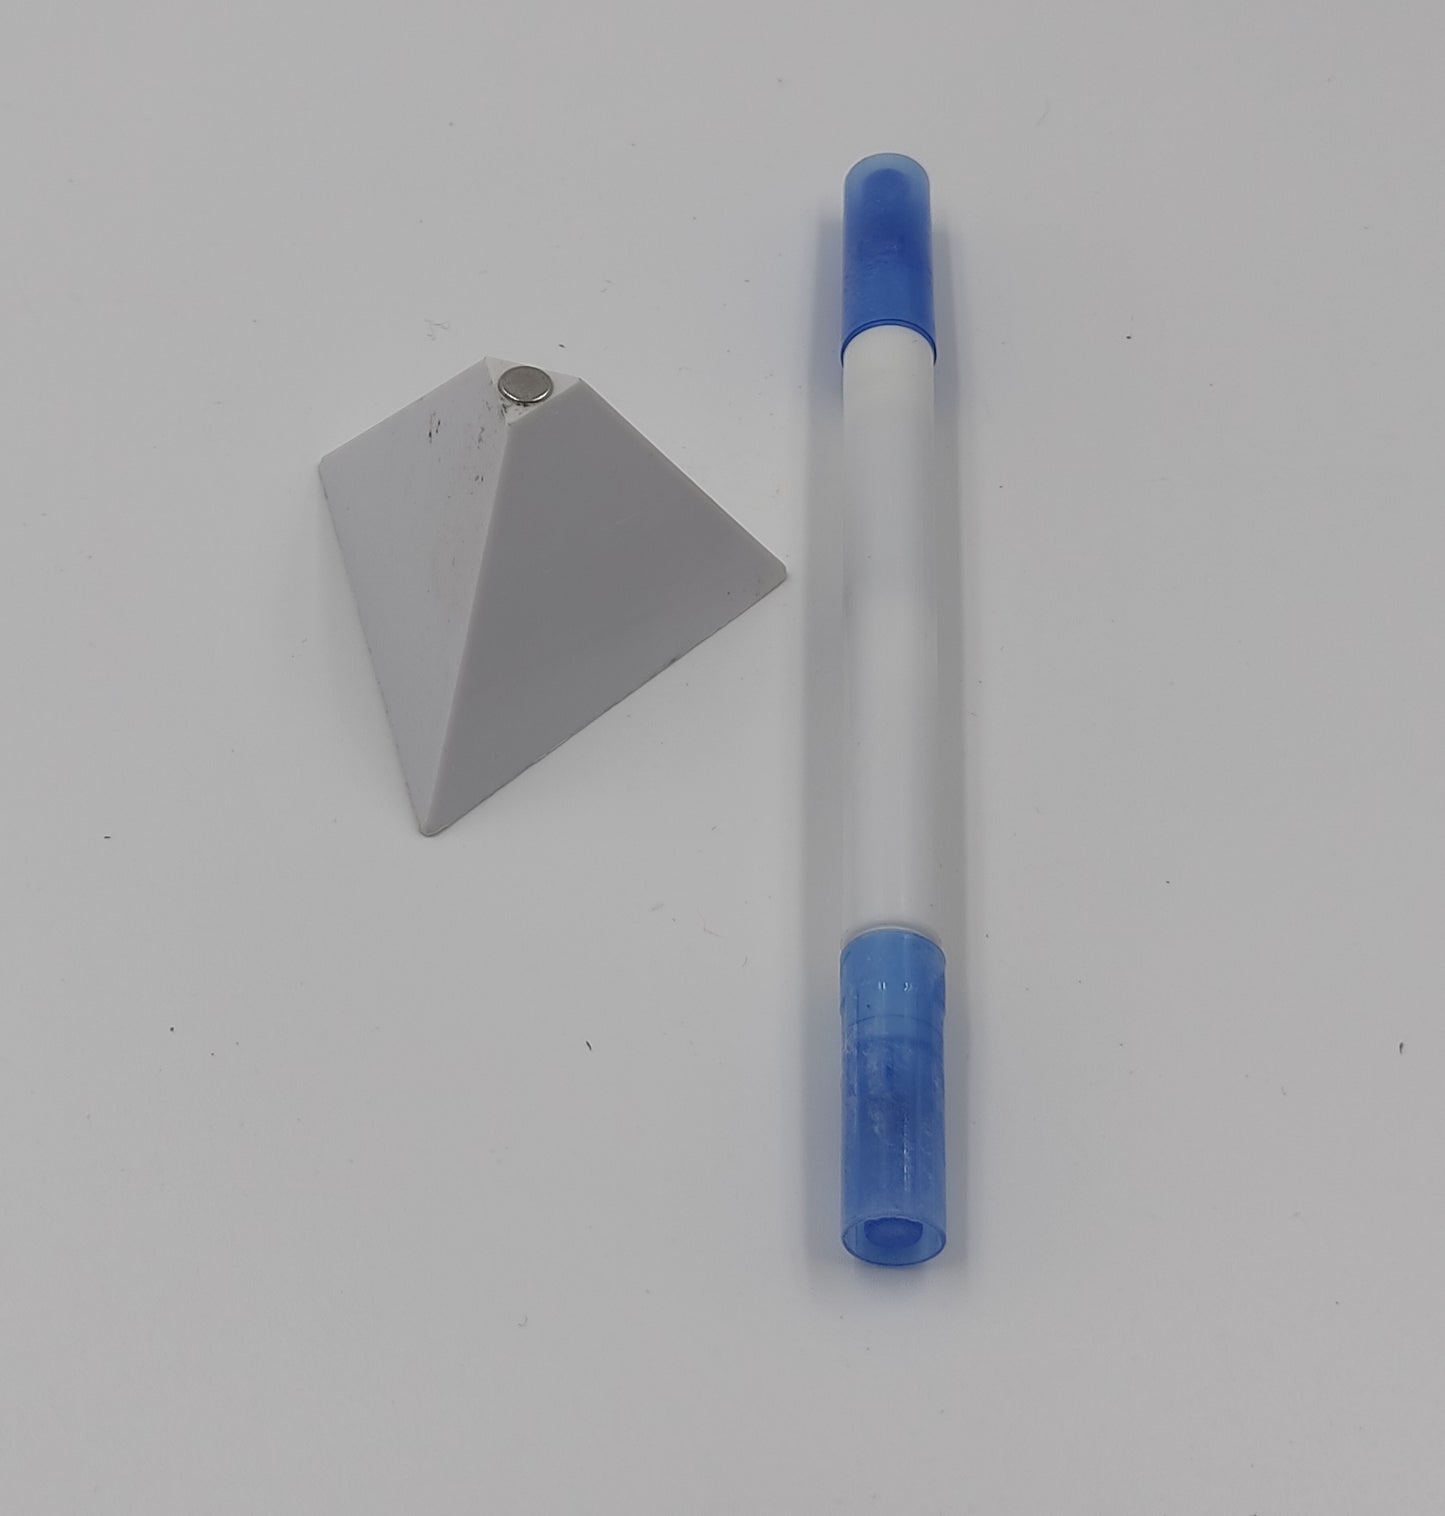 Pyramid stand with Revolving pen & highlighter